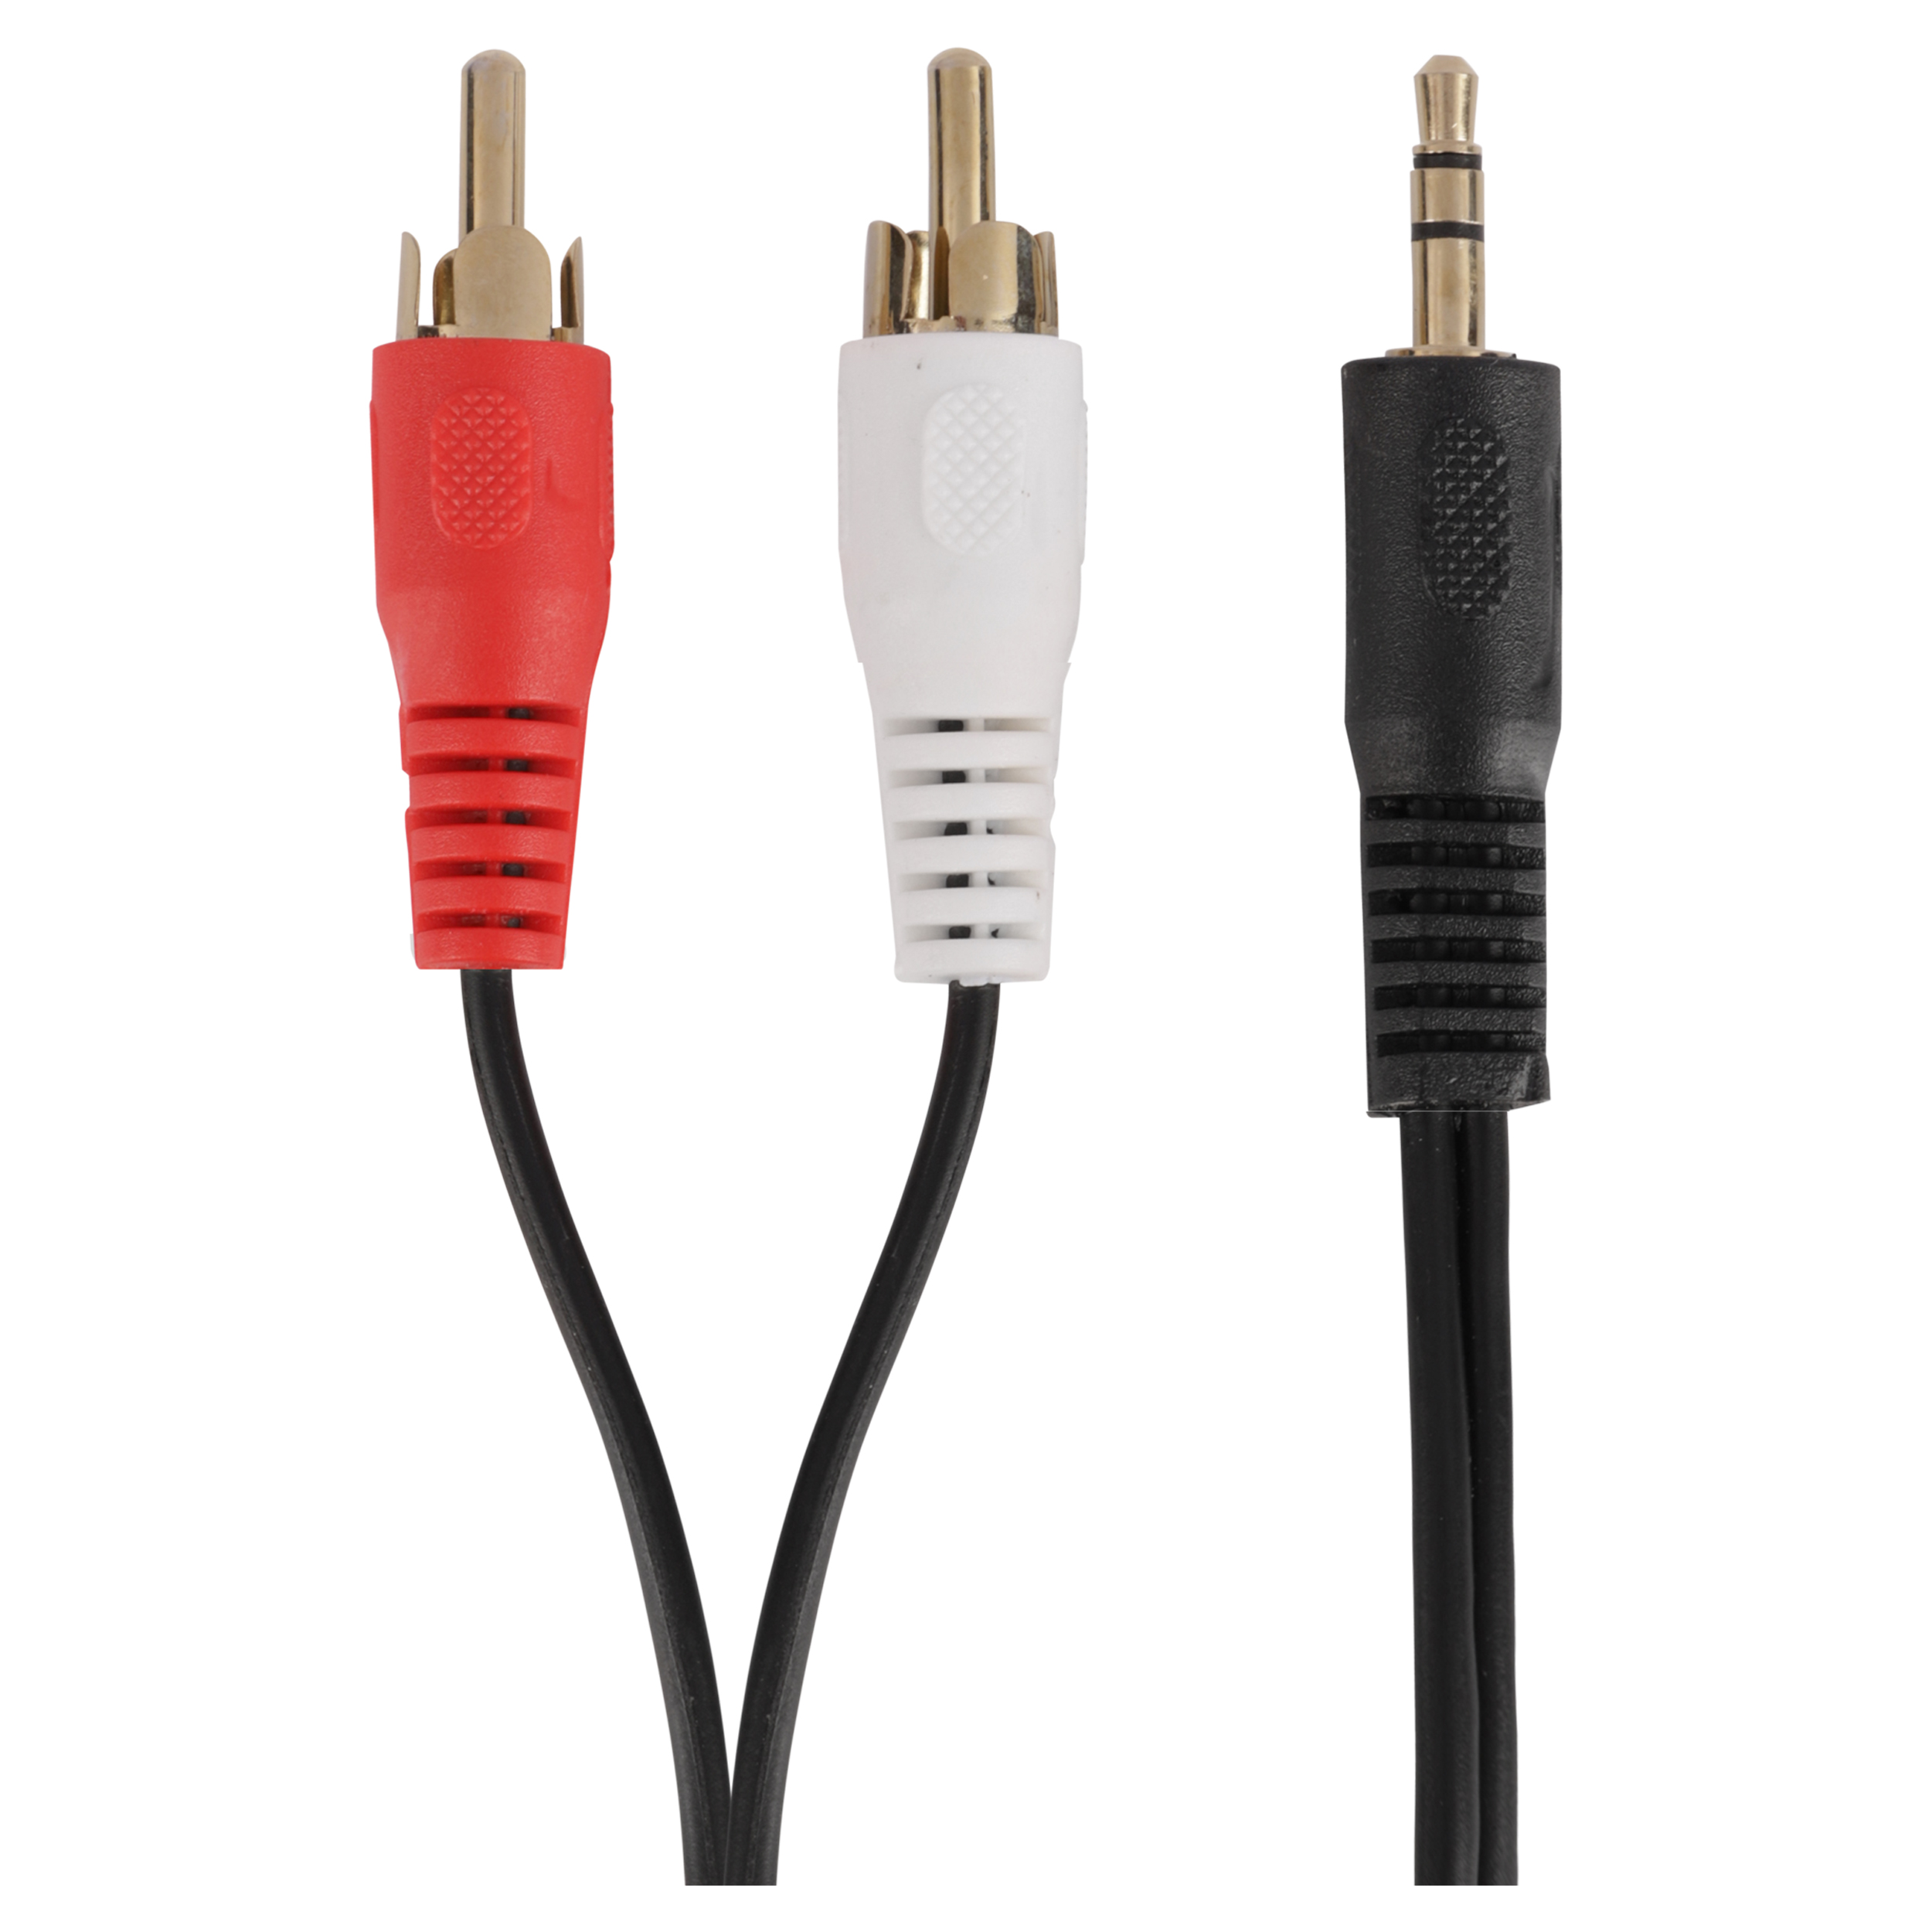 00.131.72 Q-Link  tulp kabel 2 RCA-male - 5 m - rood-wit